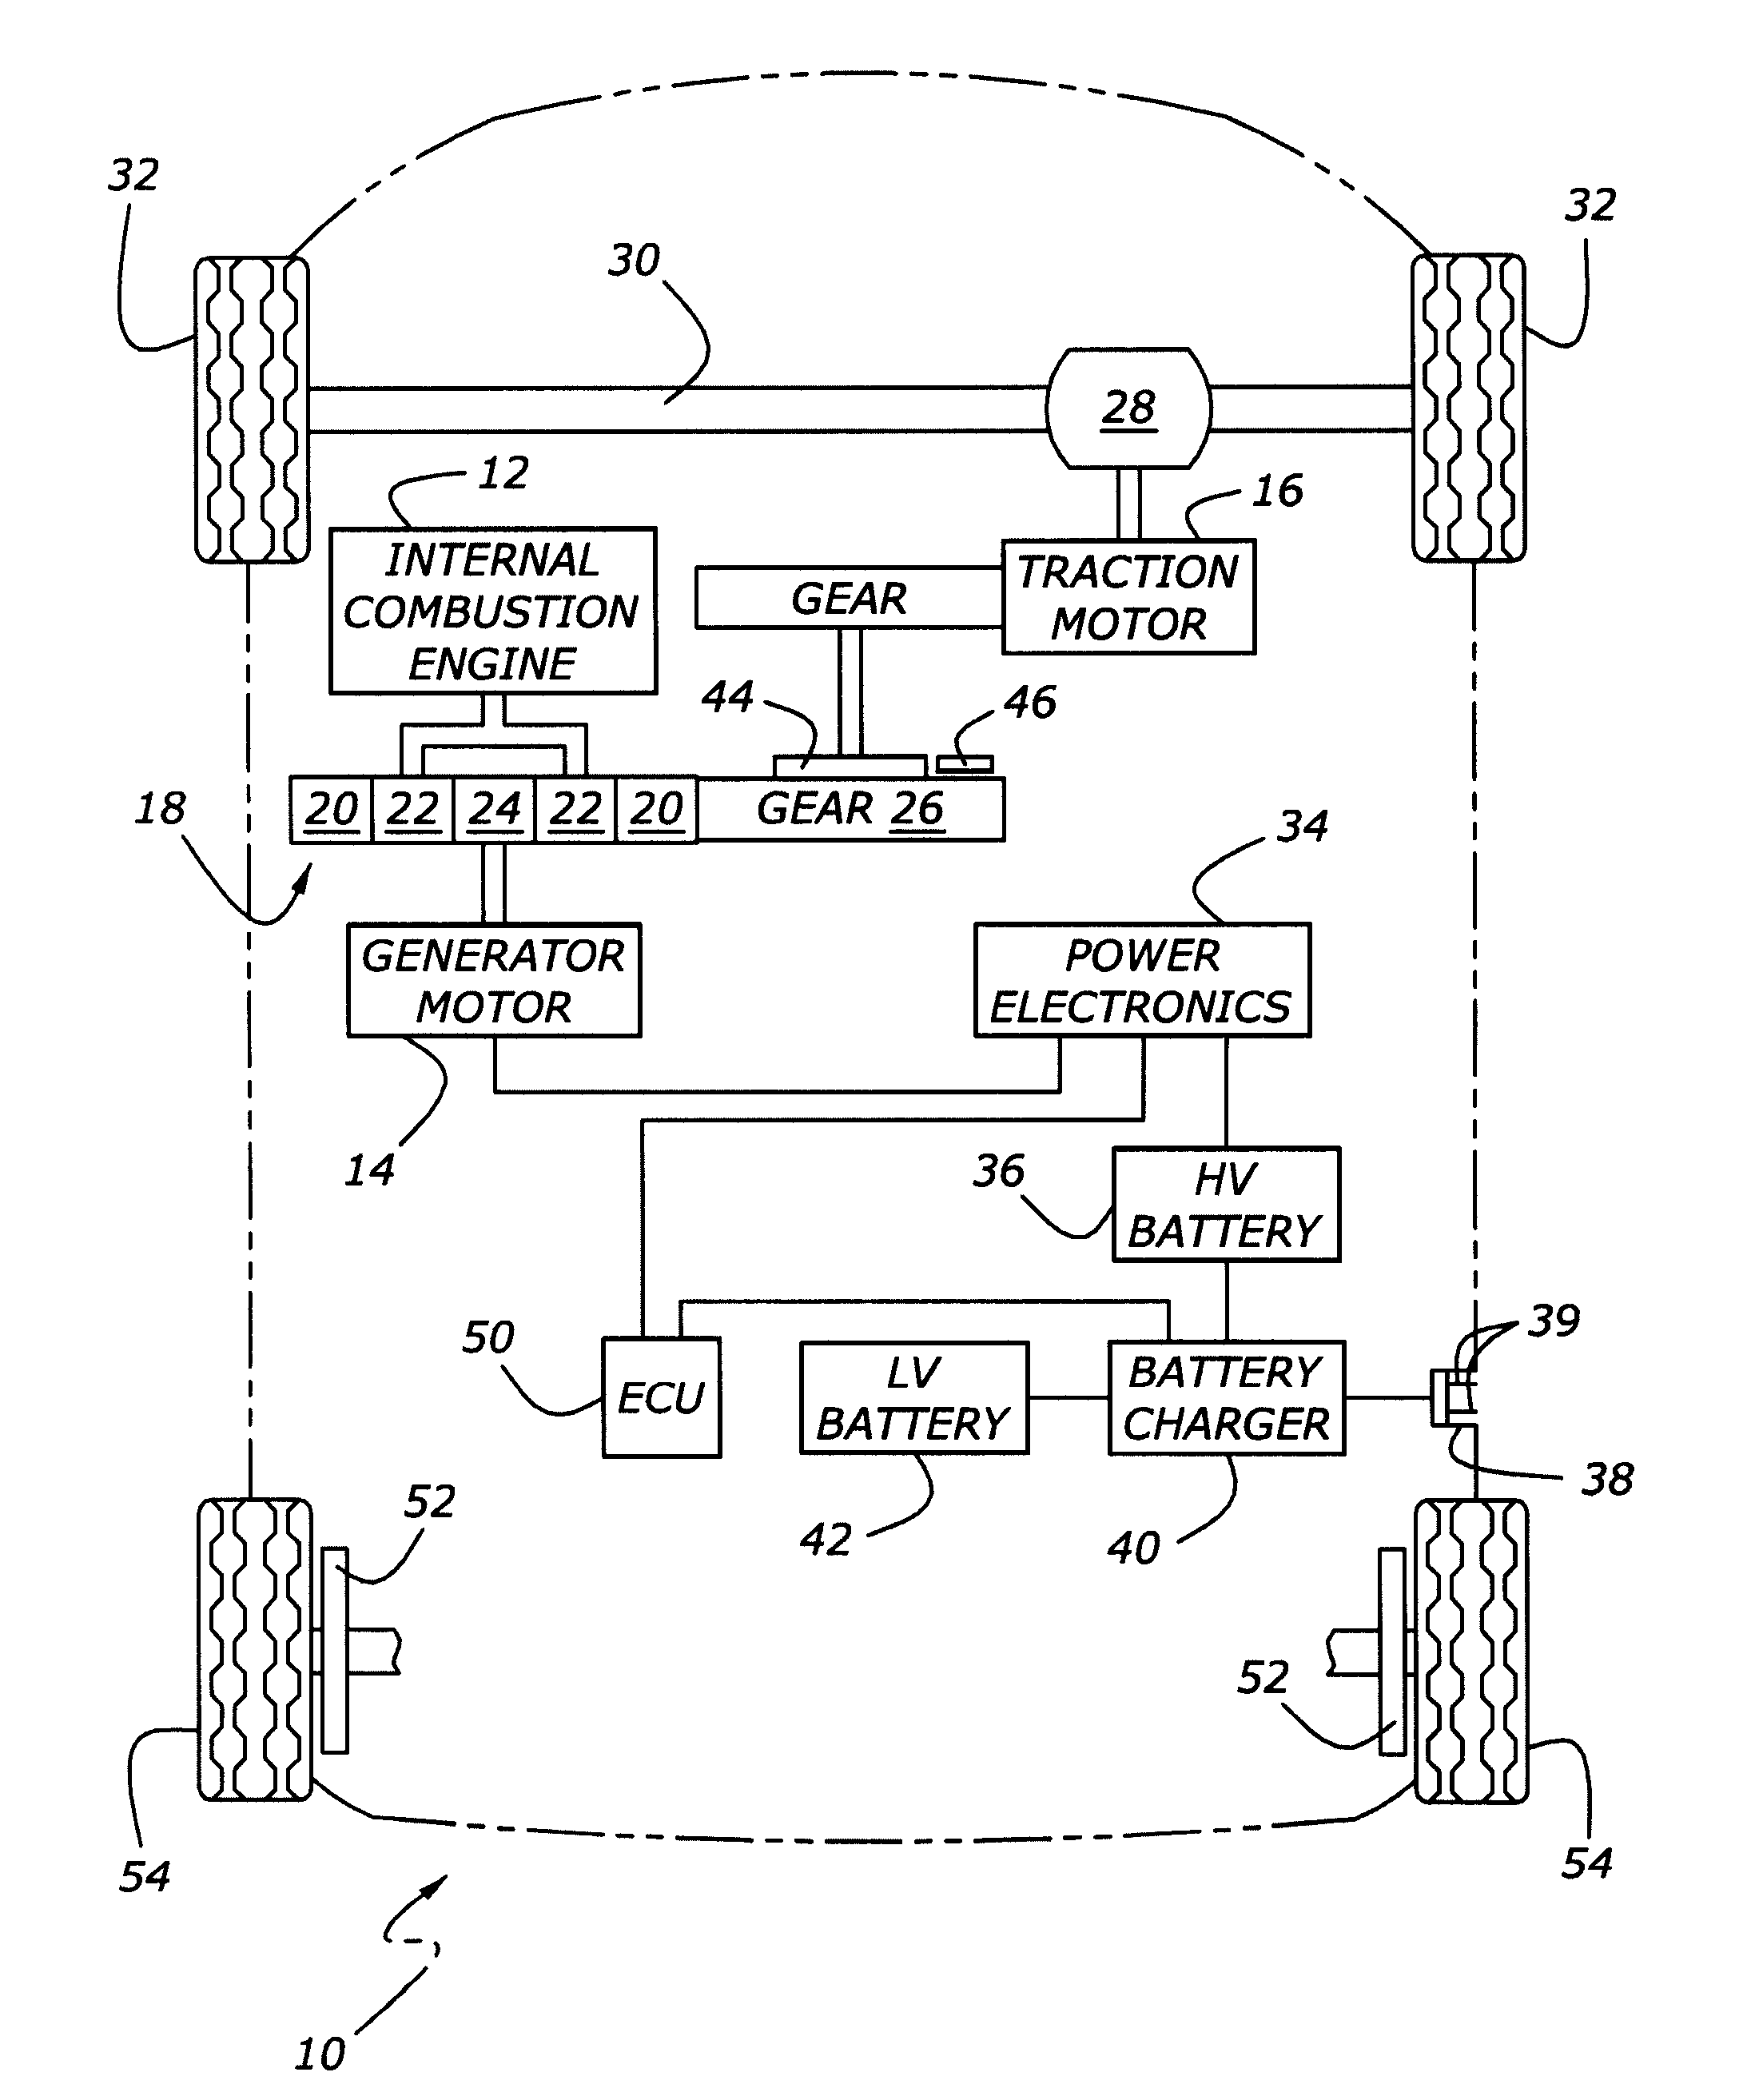 Method And System To Charge Batteries Only While Vehicle Is Parked